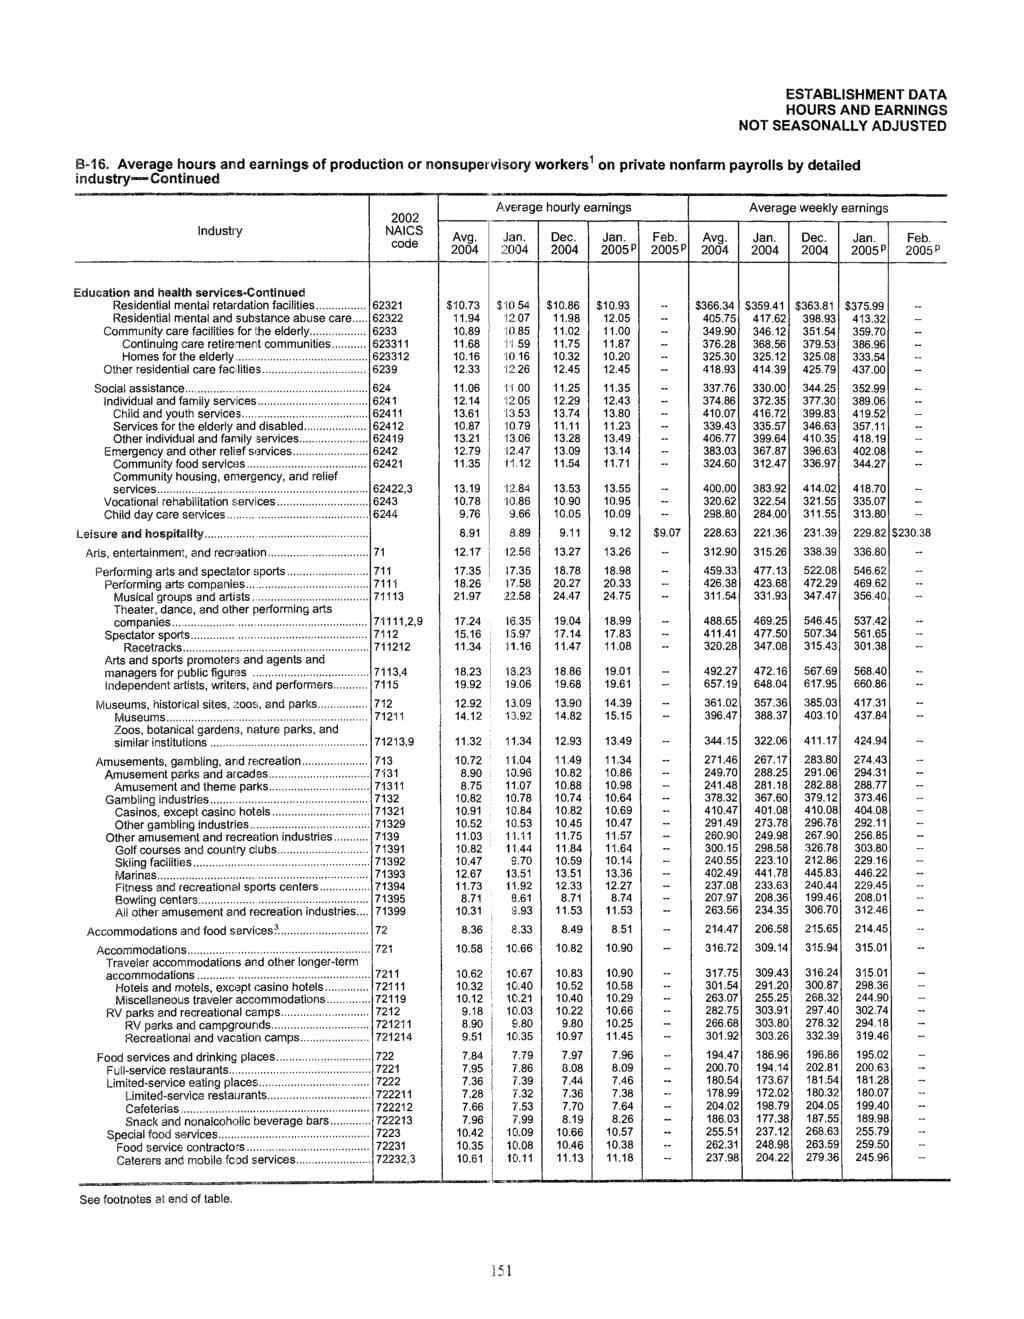 Industry 2002 NAICS code Avg. Average hourly earnings Avg. Average weekly earnings Education and health services-continued Residential mental retardation facilities 62321 $10.73 $10,54 $10.86 $10.